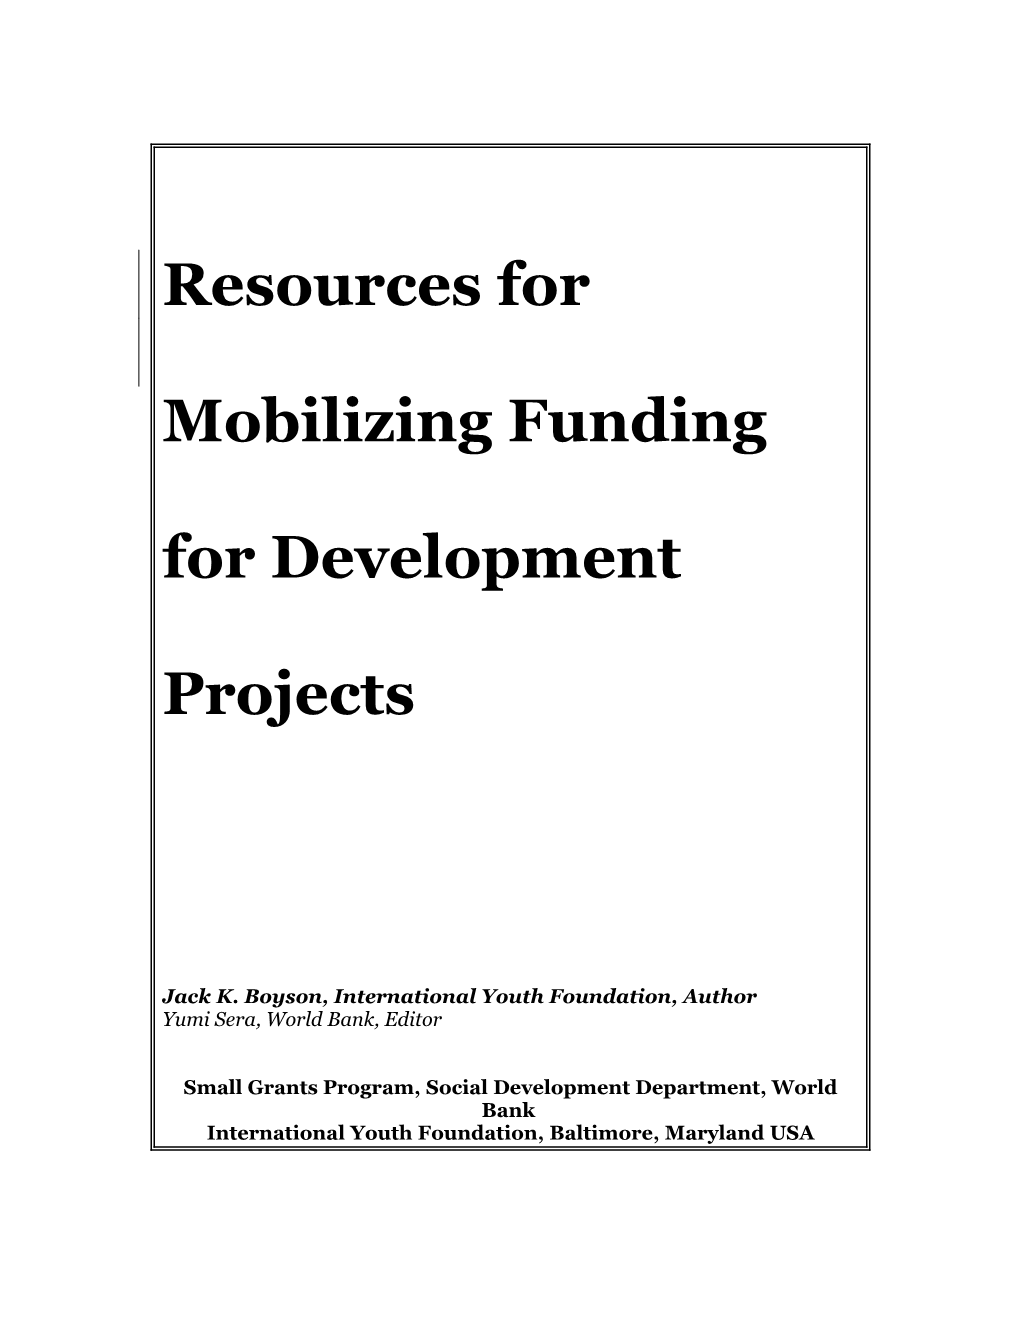 How to Mobilize Funding for Development Projects